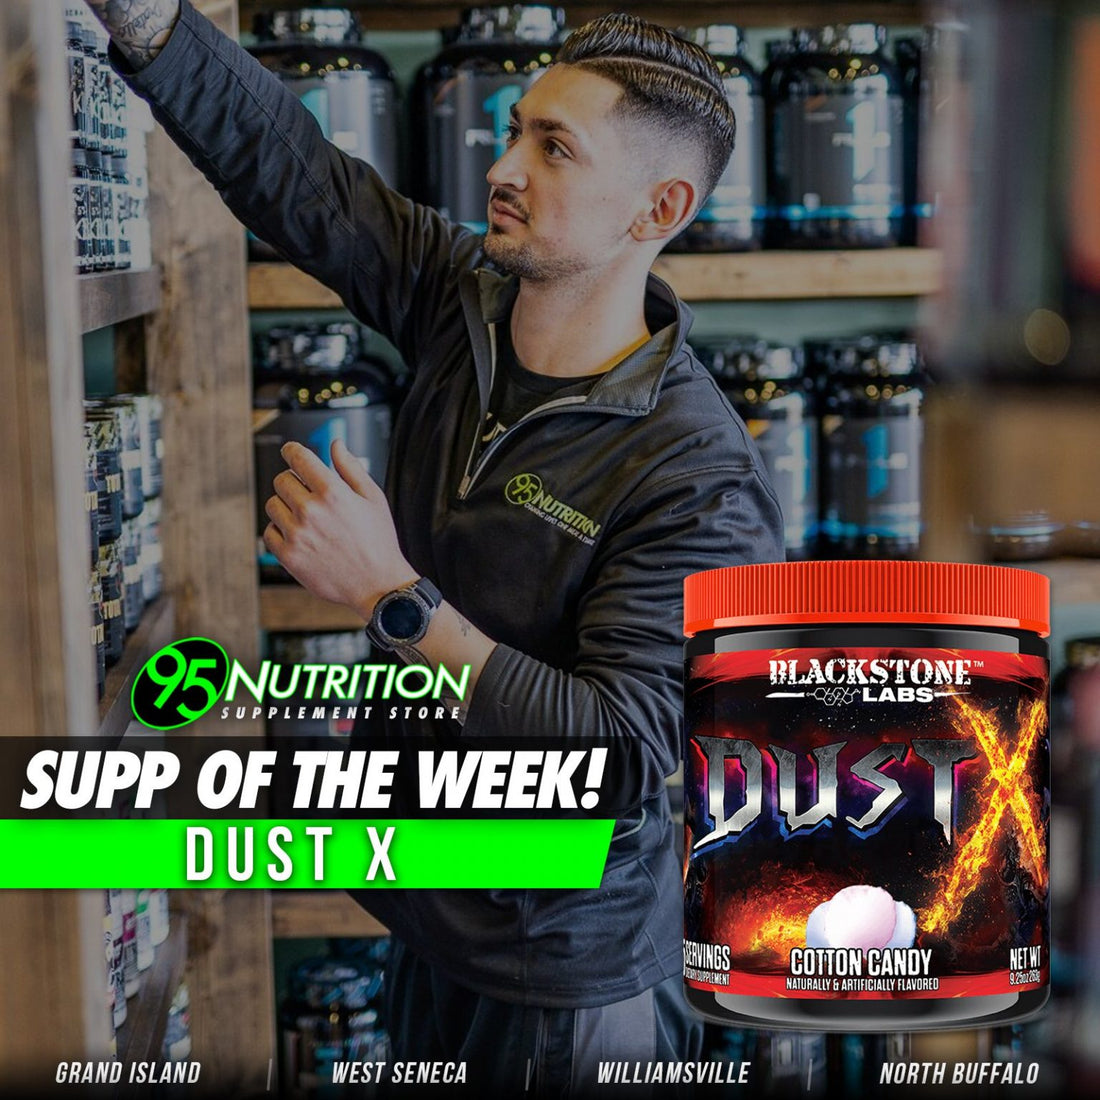 SUPPLEMENT OF THE WEEK: BLACKSTONE LABS DUST X